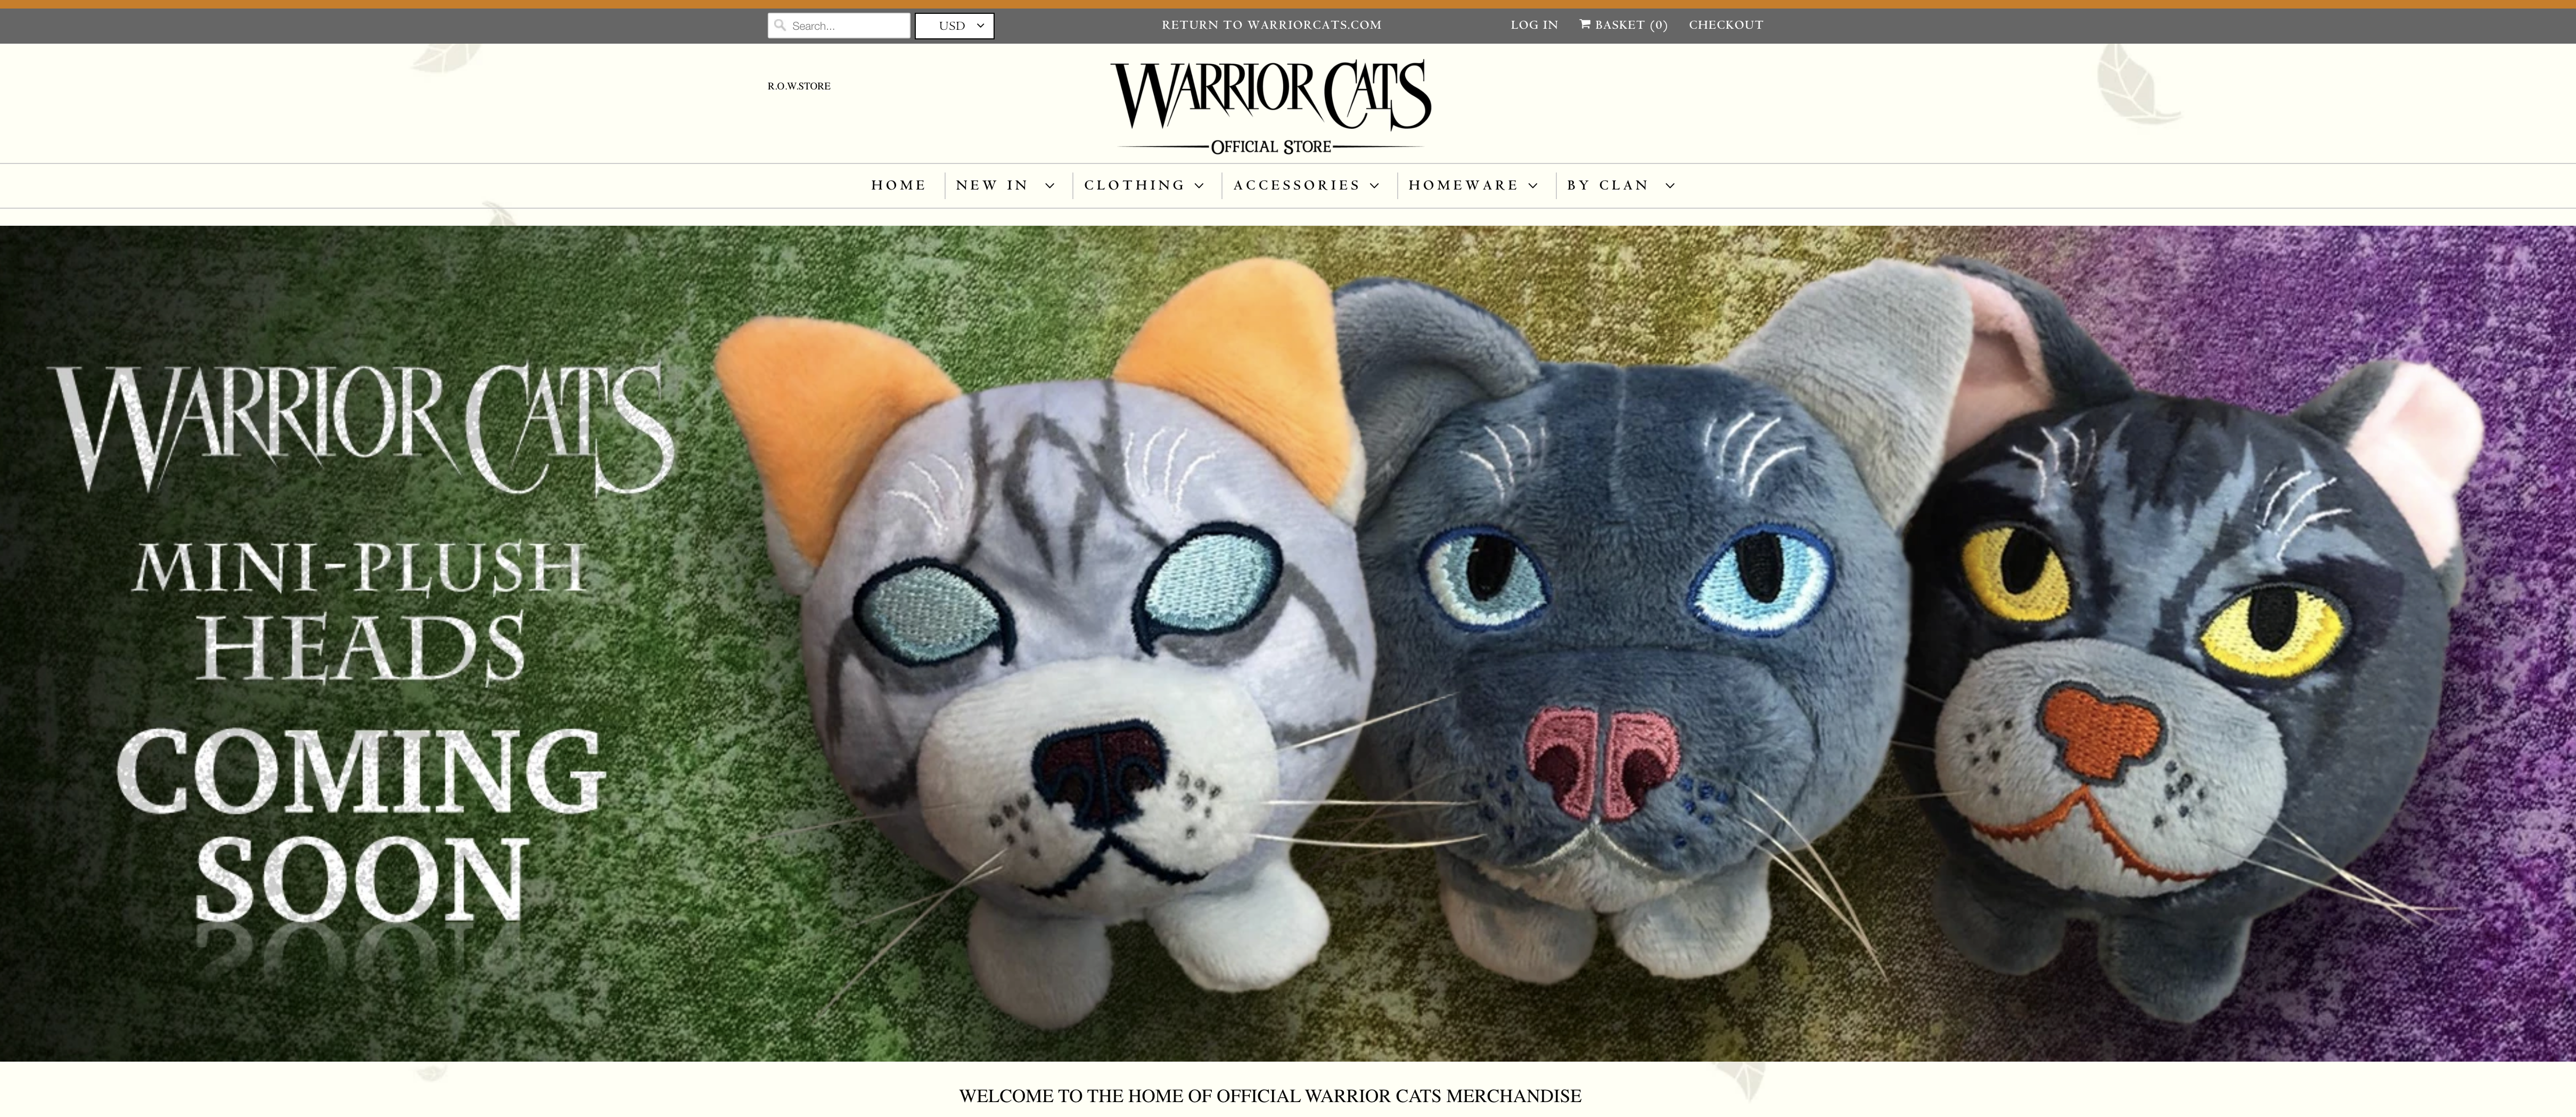 Warrior Cats Gifts & Merchandise for Sale